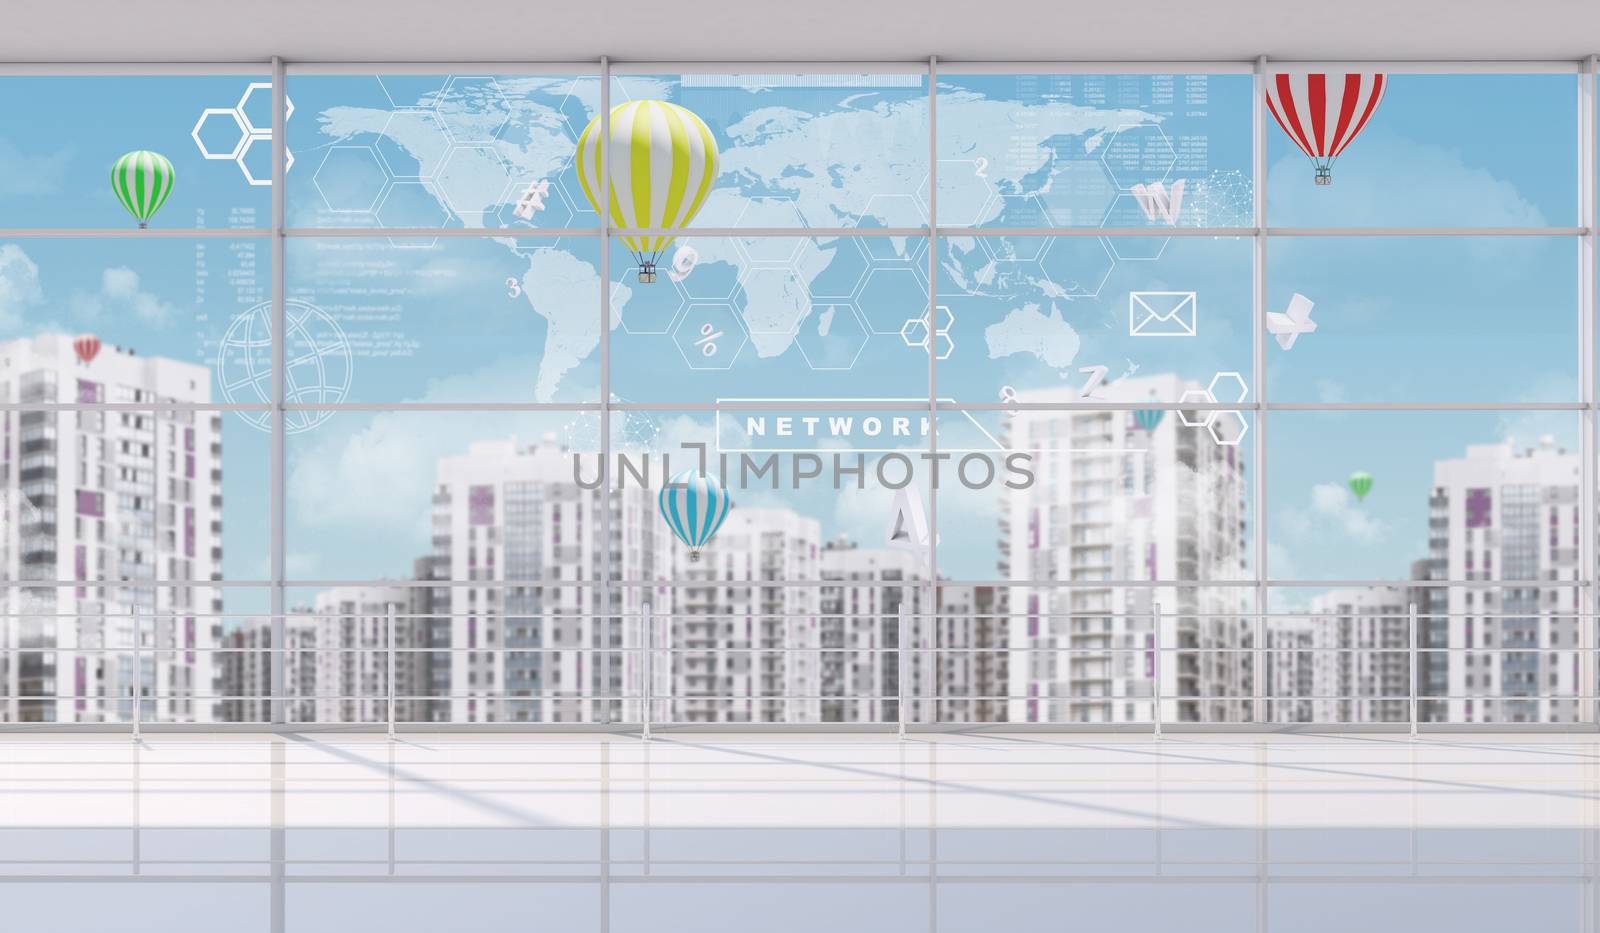 Cityscape outside window with world view, fine weather with balloons, indoor view